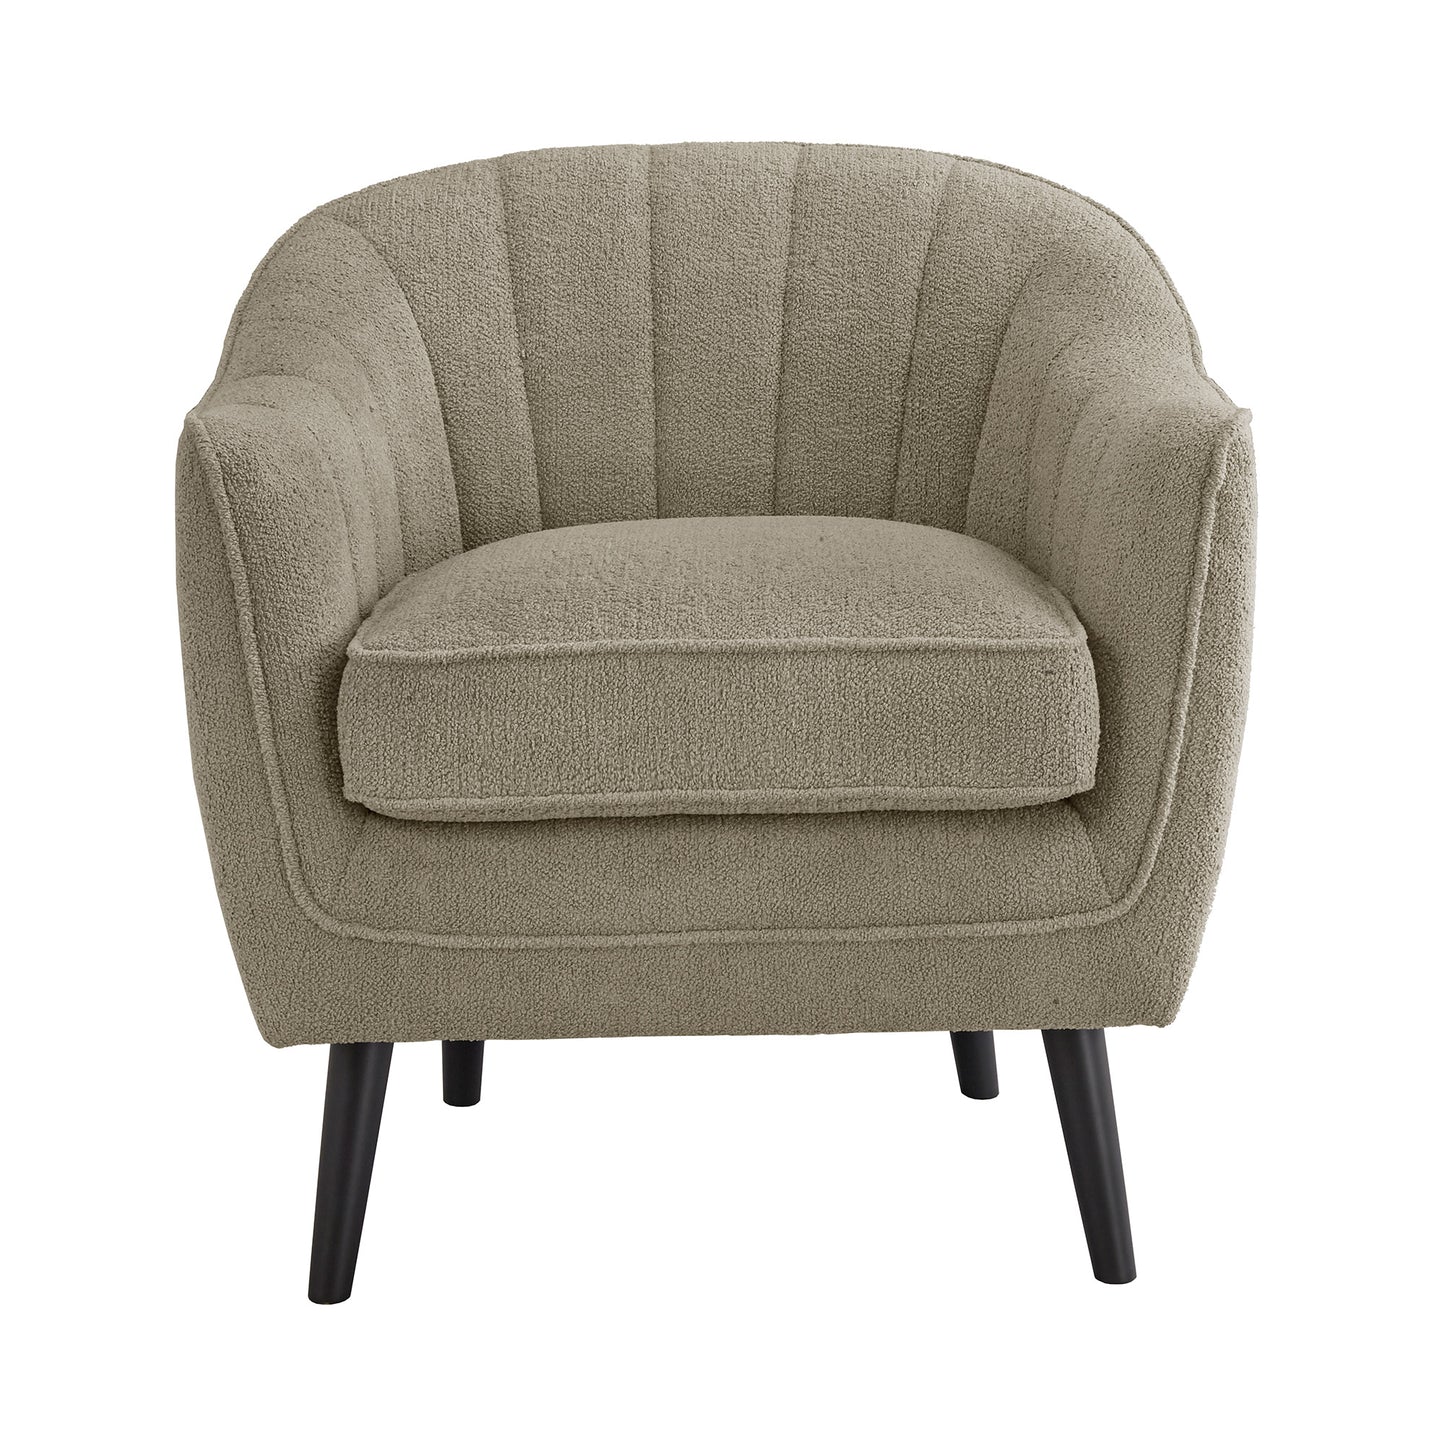 Mid-Century Modern Channel-Tufted Accent Chair with Removable Cushion Cover - Taupe